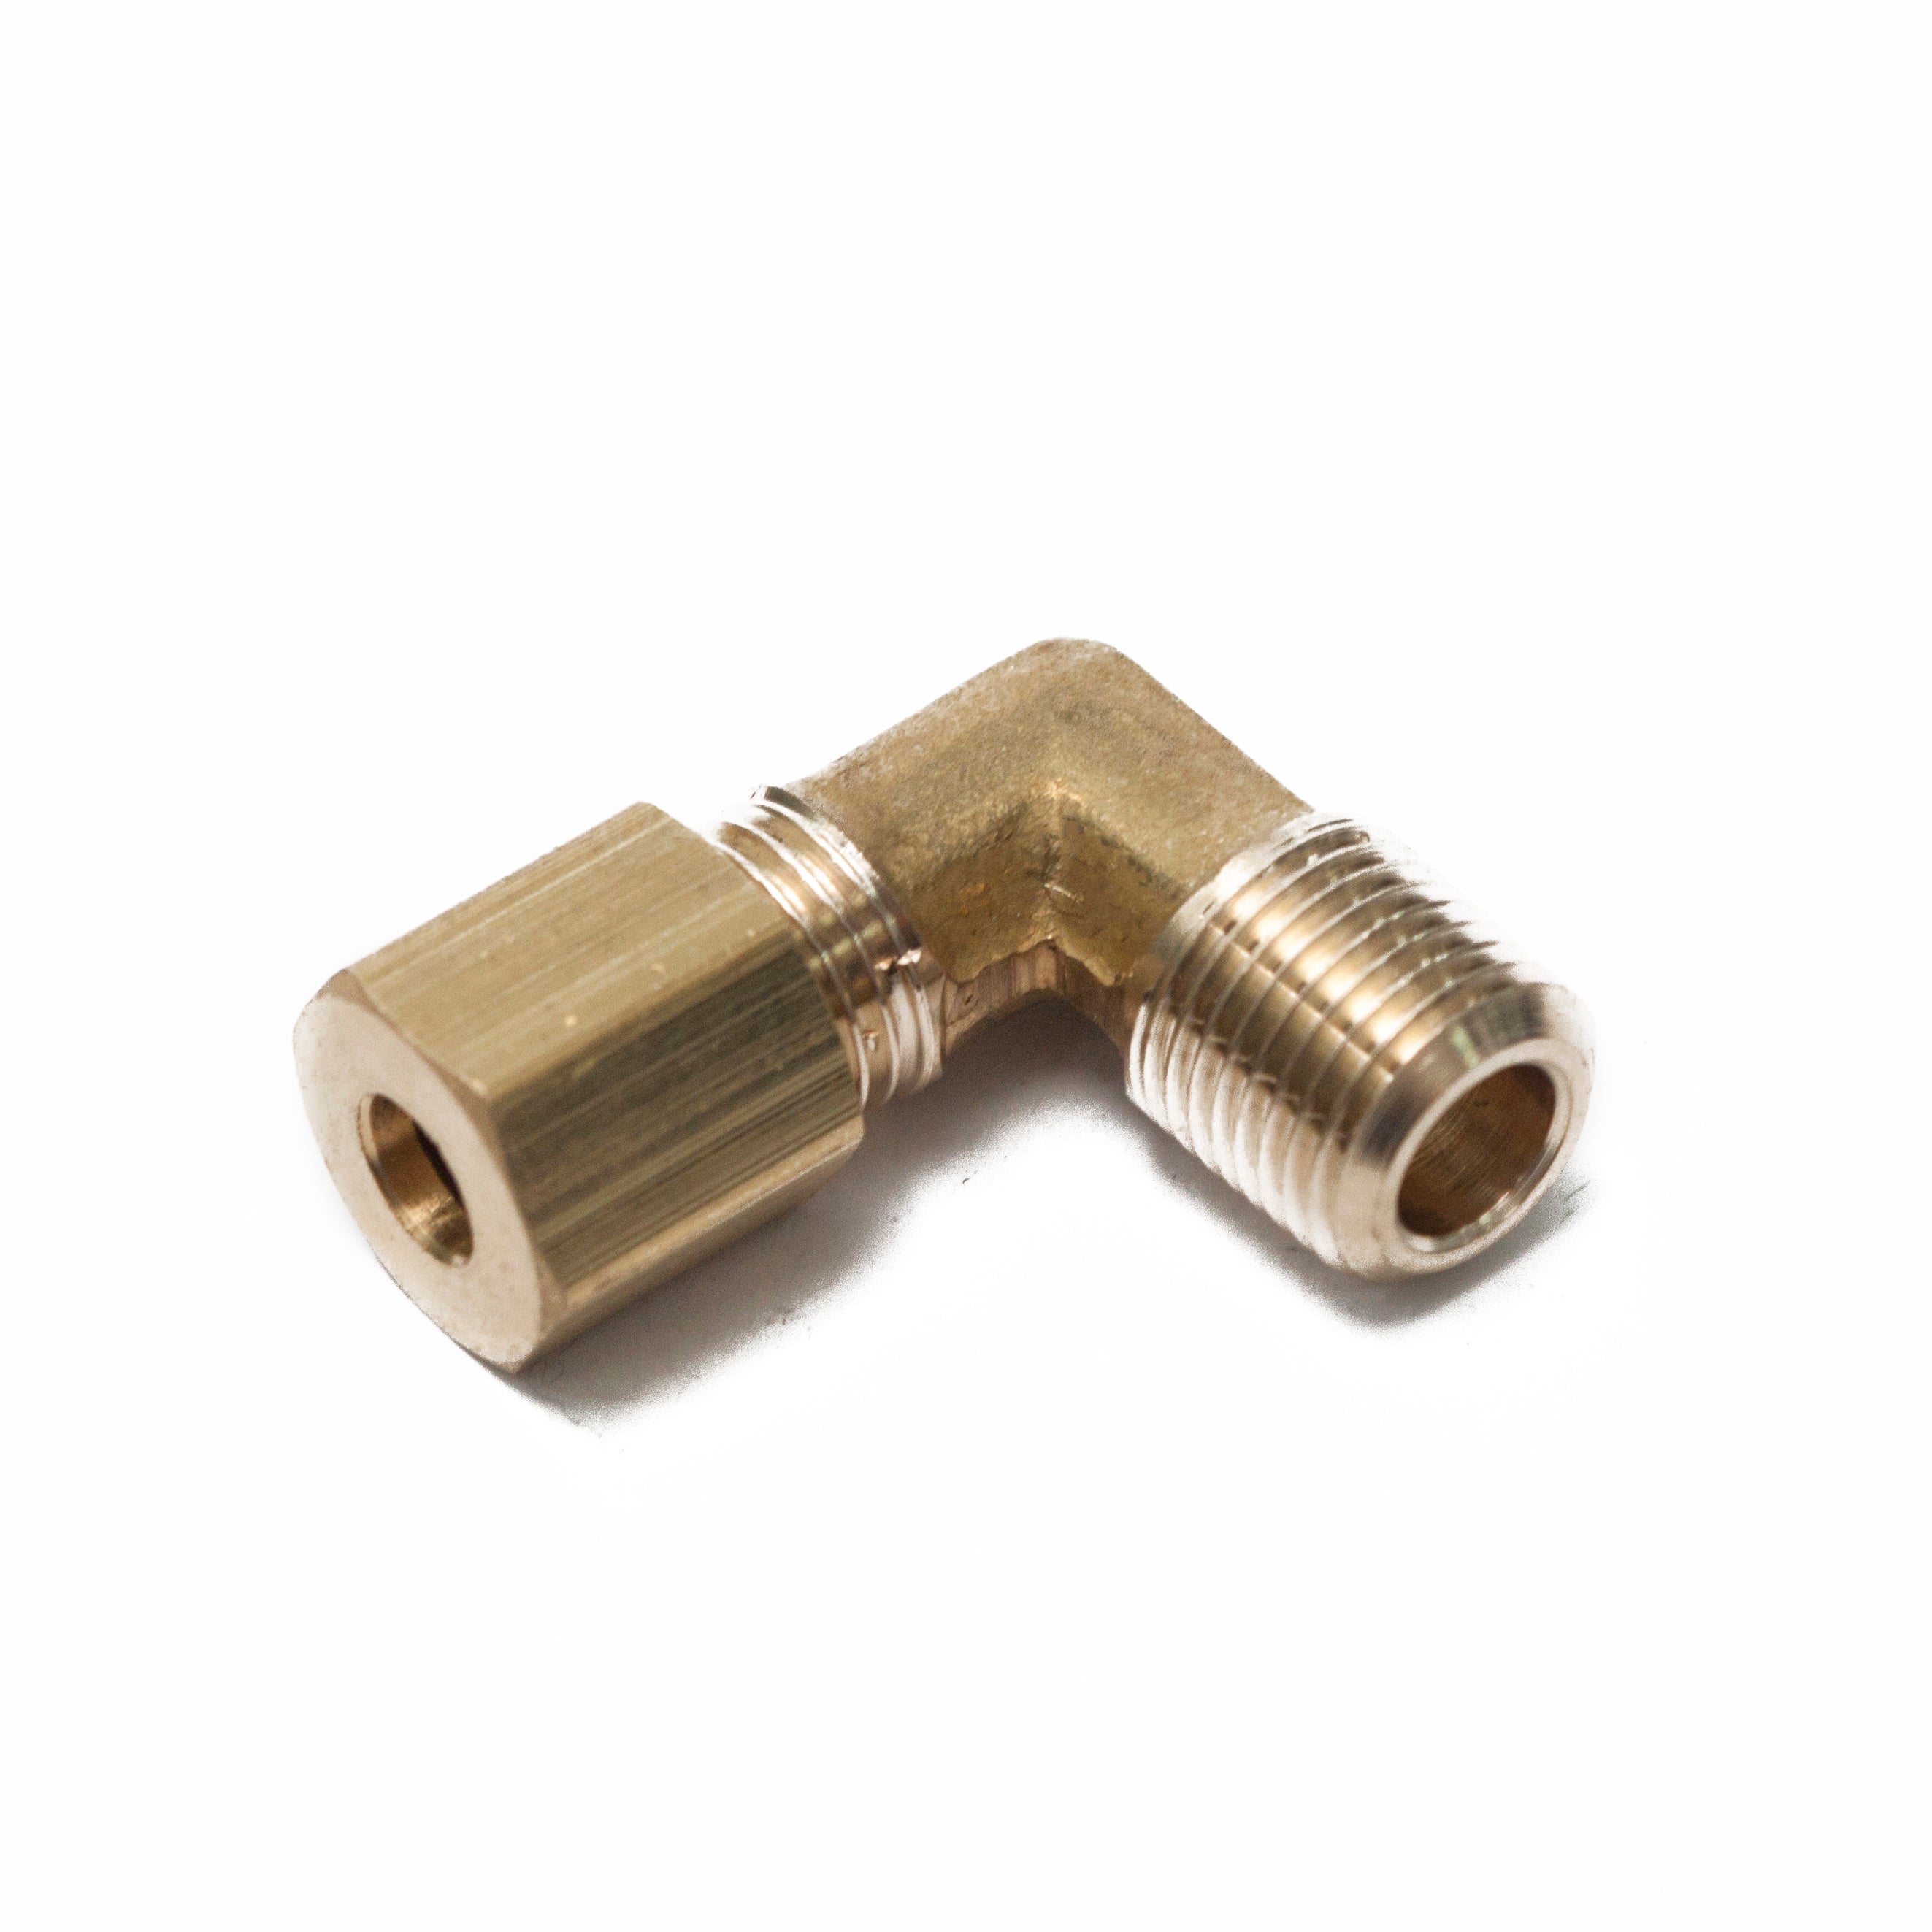 LTWFITTING 5/16 in. O.D. Brass Compression Coupling Fitting (10